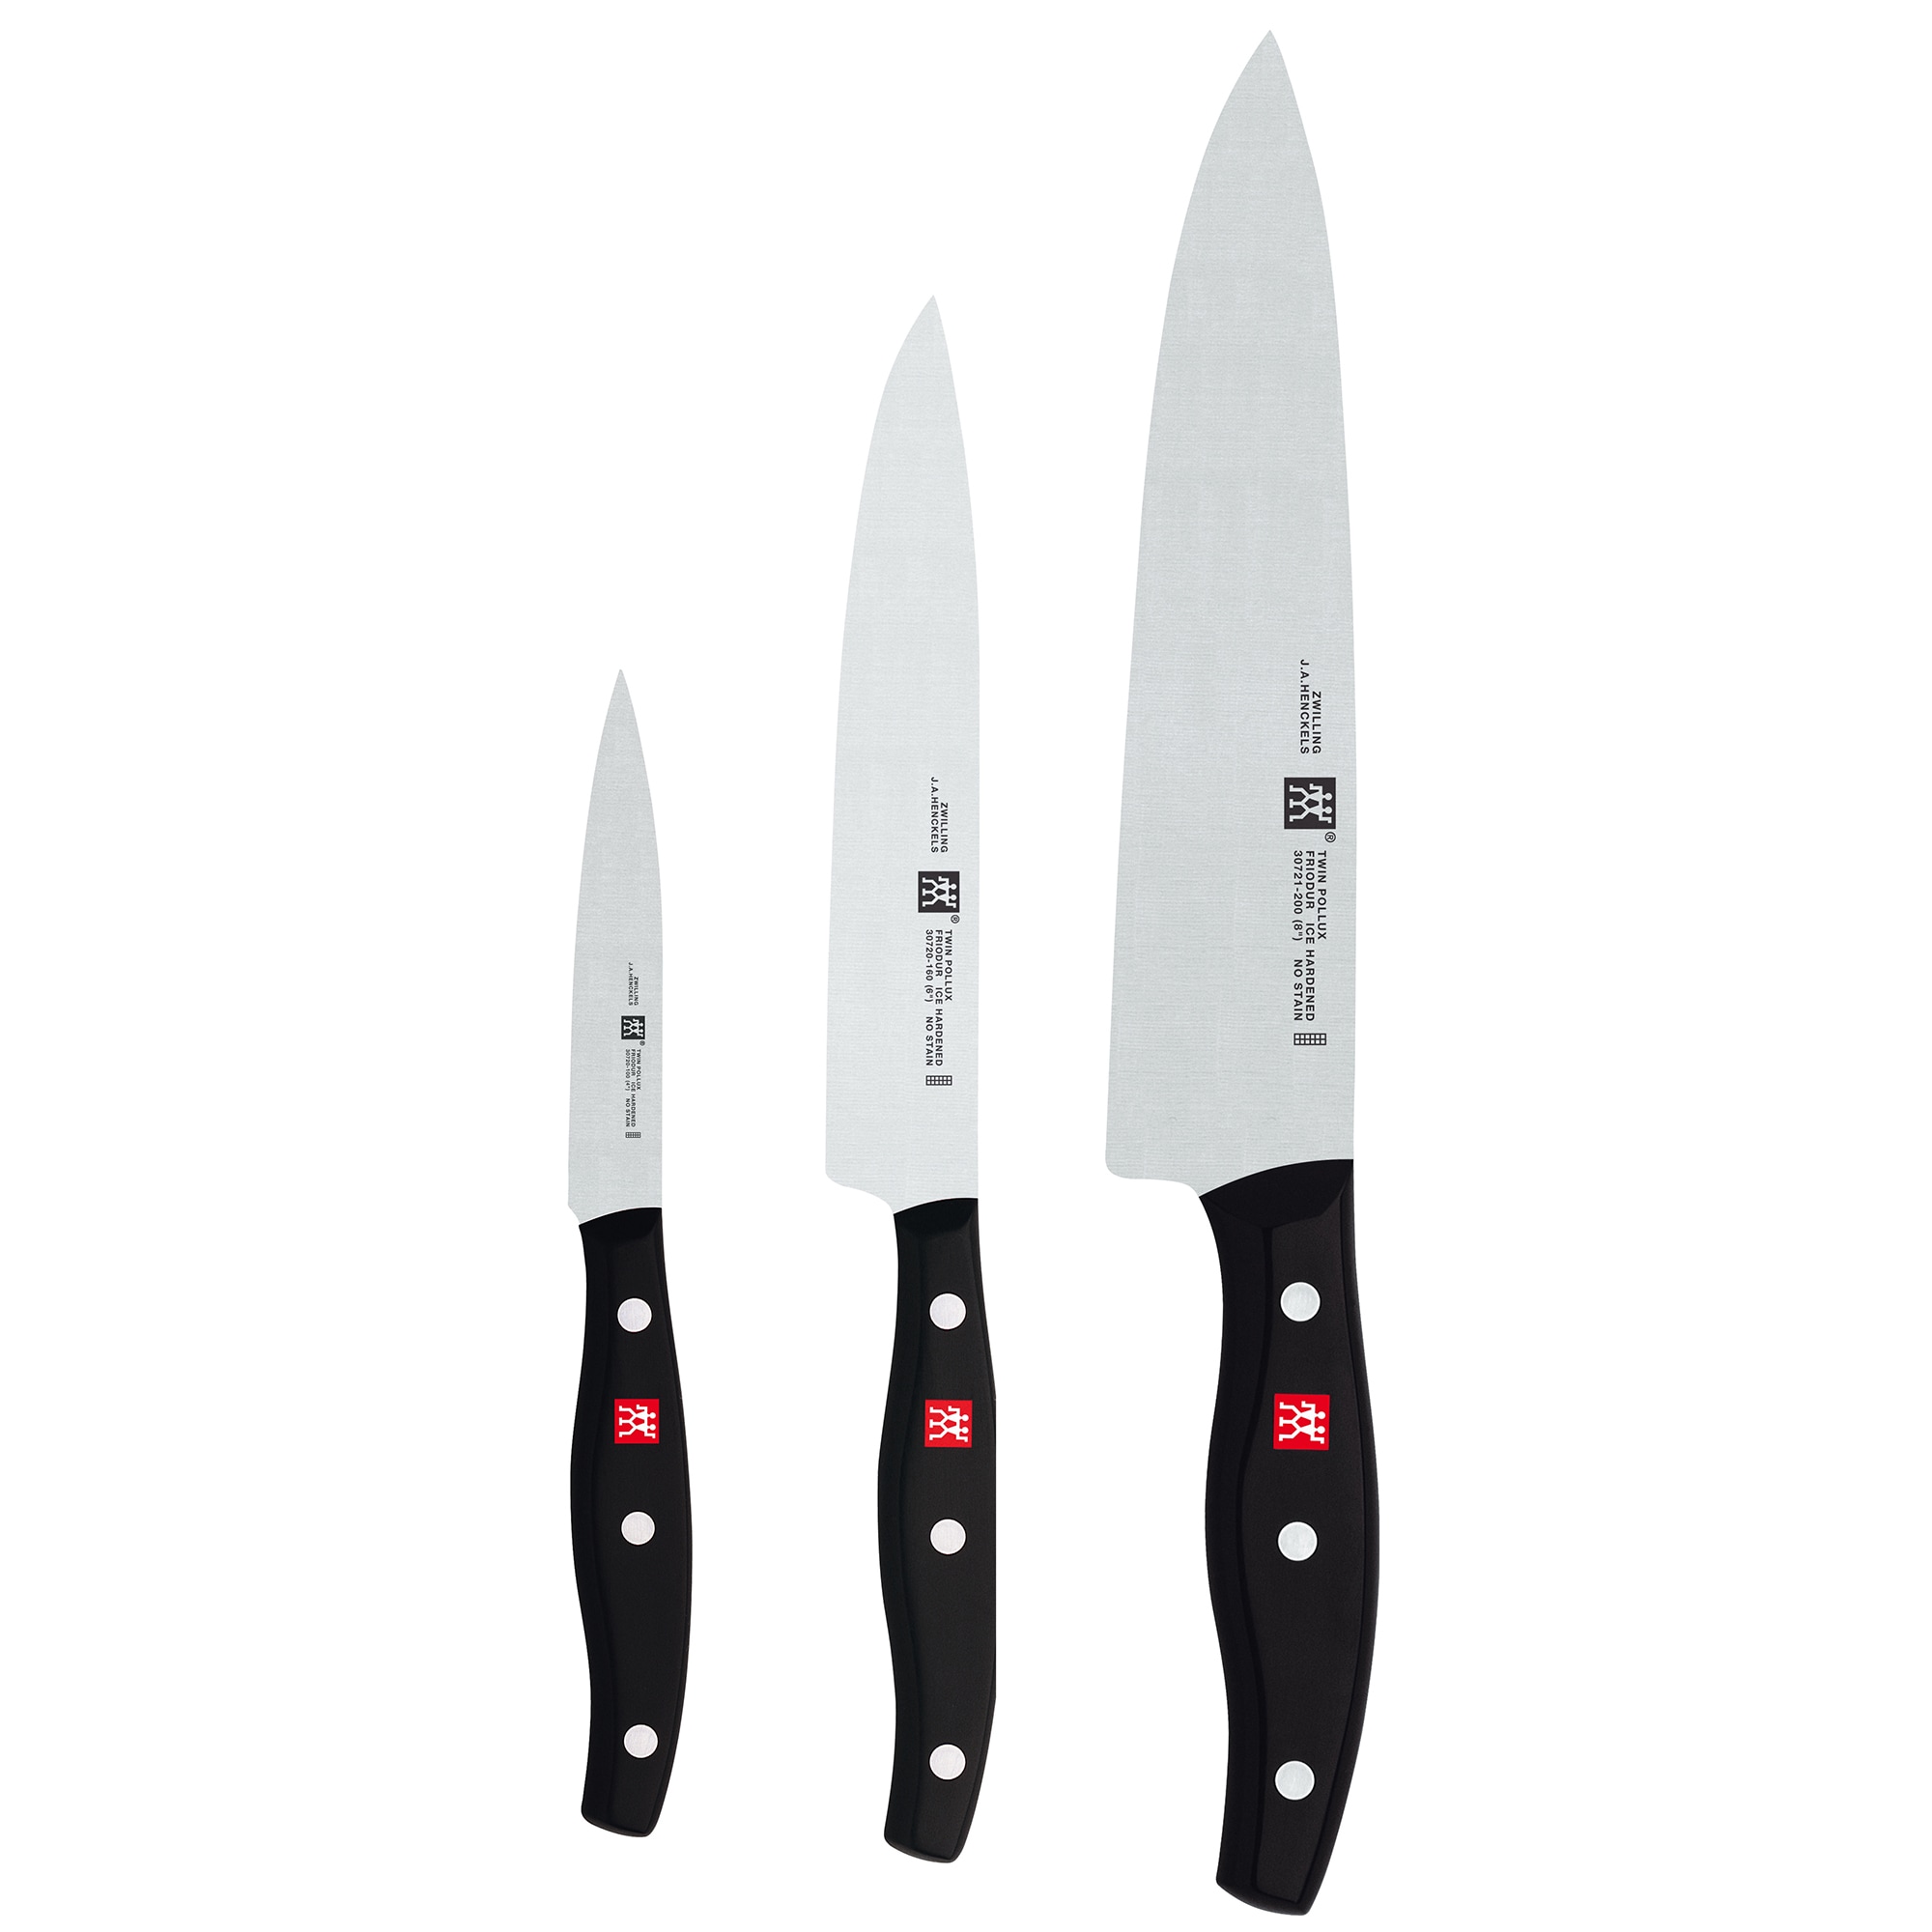 Zwilling ZWILLING J.A. Henckels TWIN Signature 3-pc Starter Knife